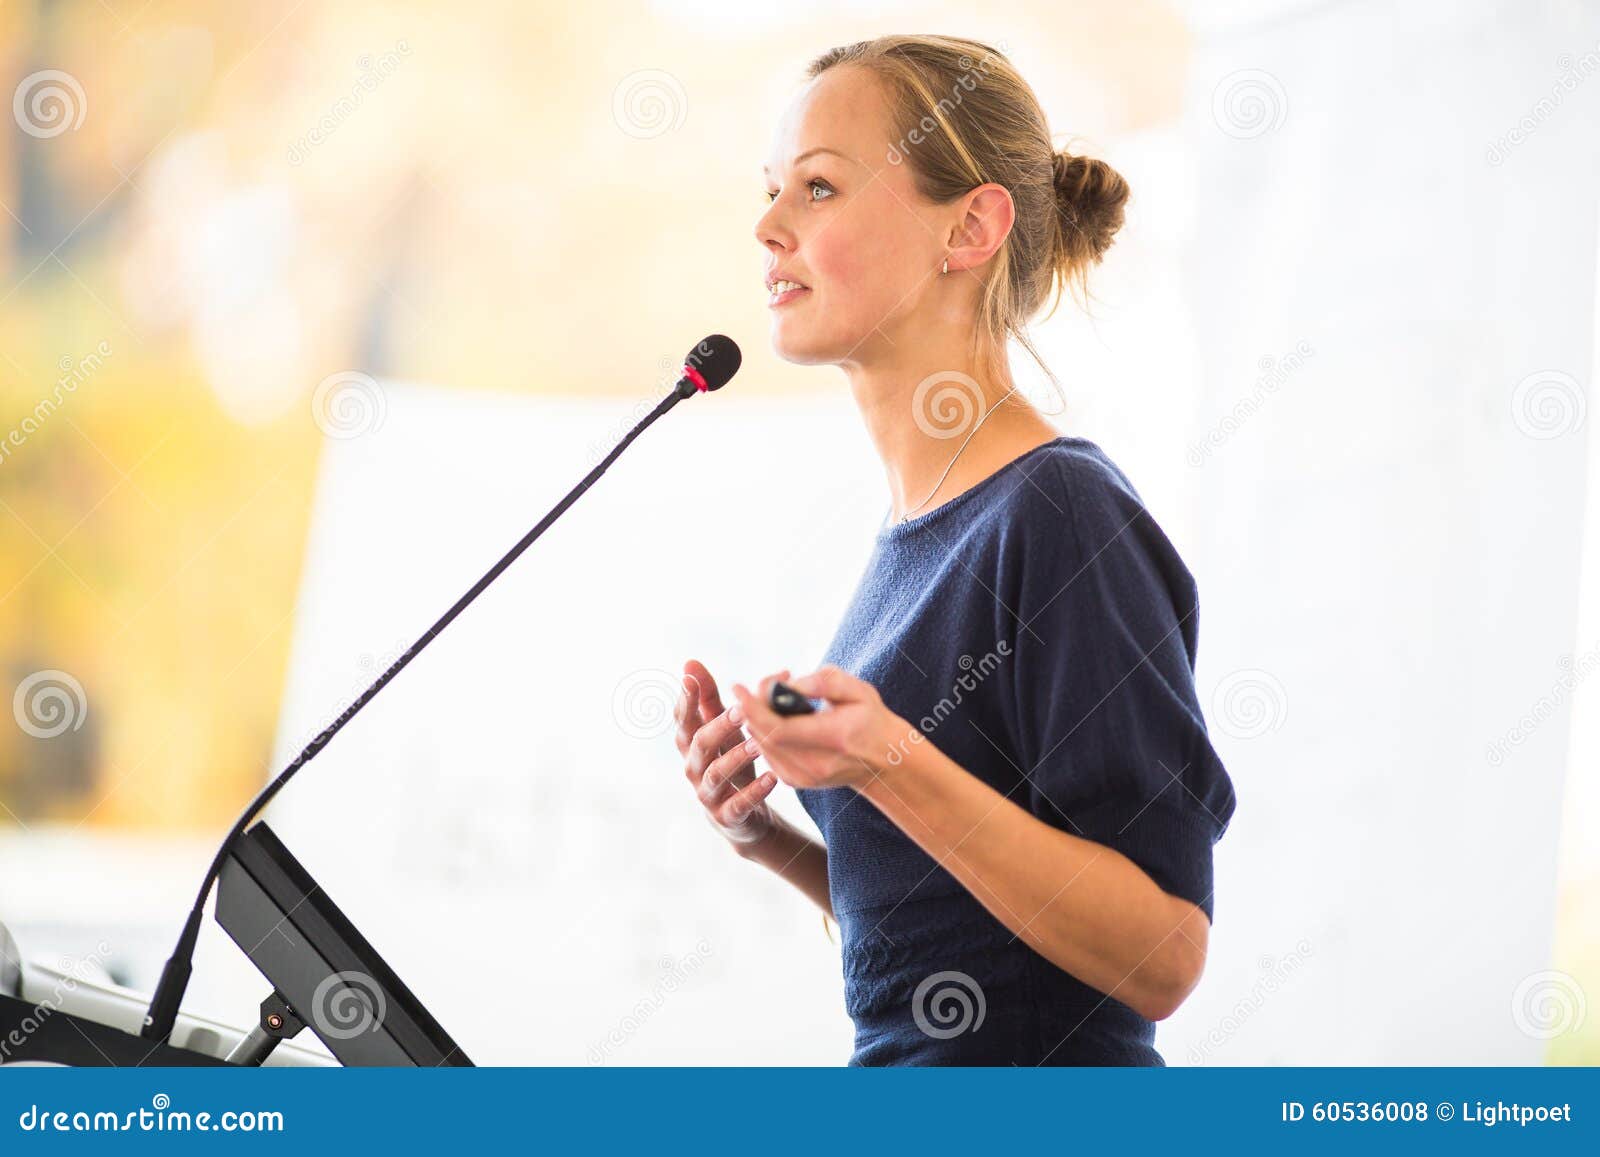 pretty, young business woman giving a presentation